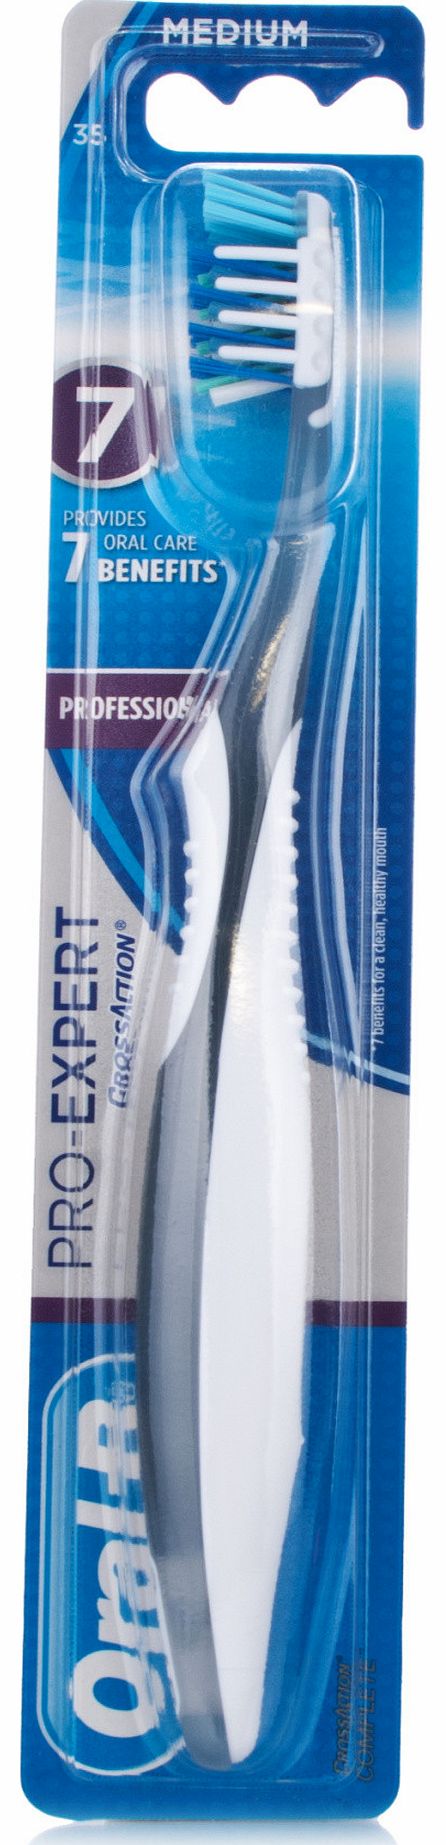 Oral-B Pro-Expert CrossAction Professional 35